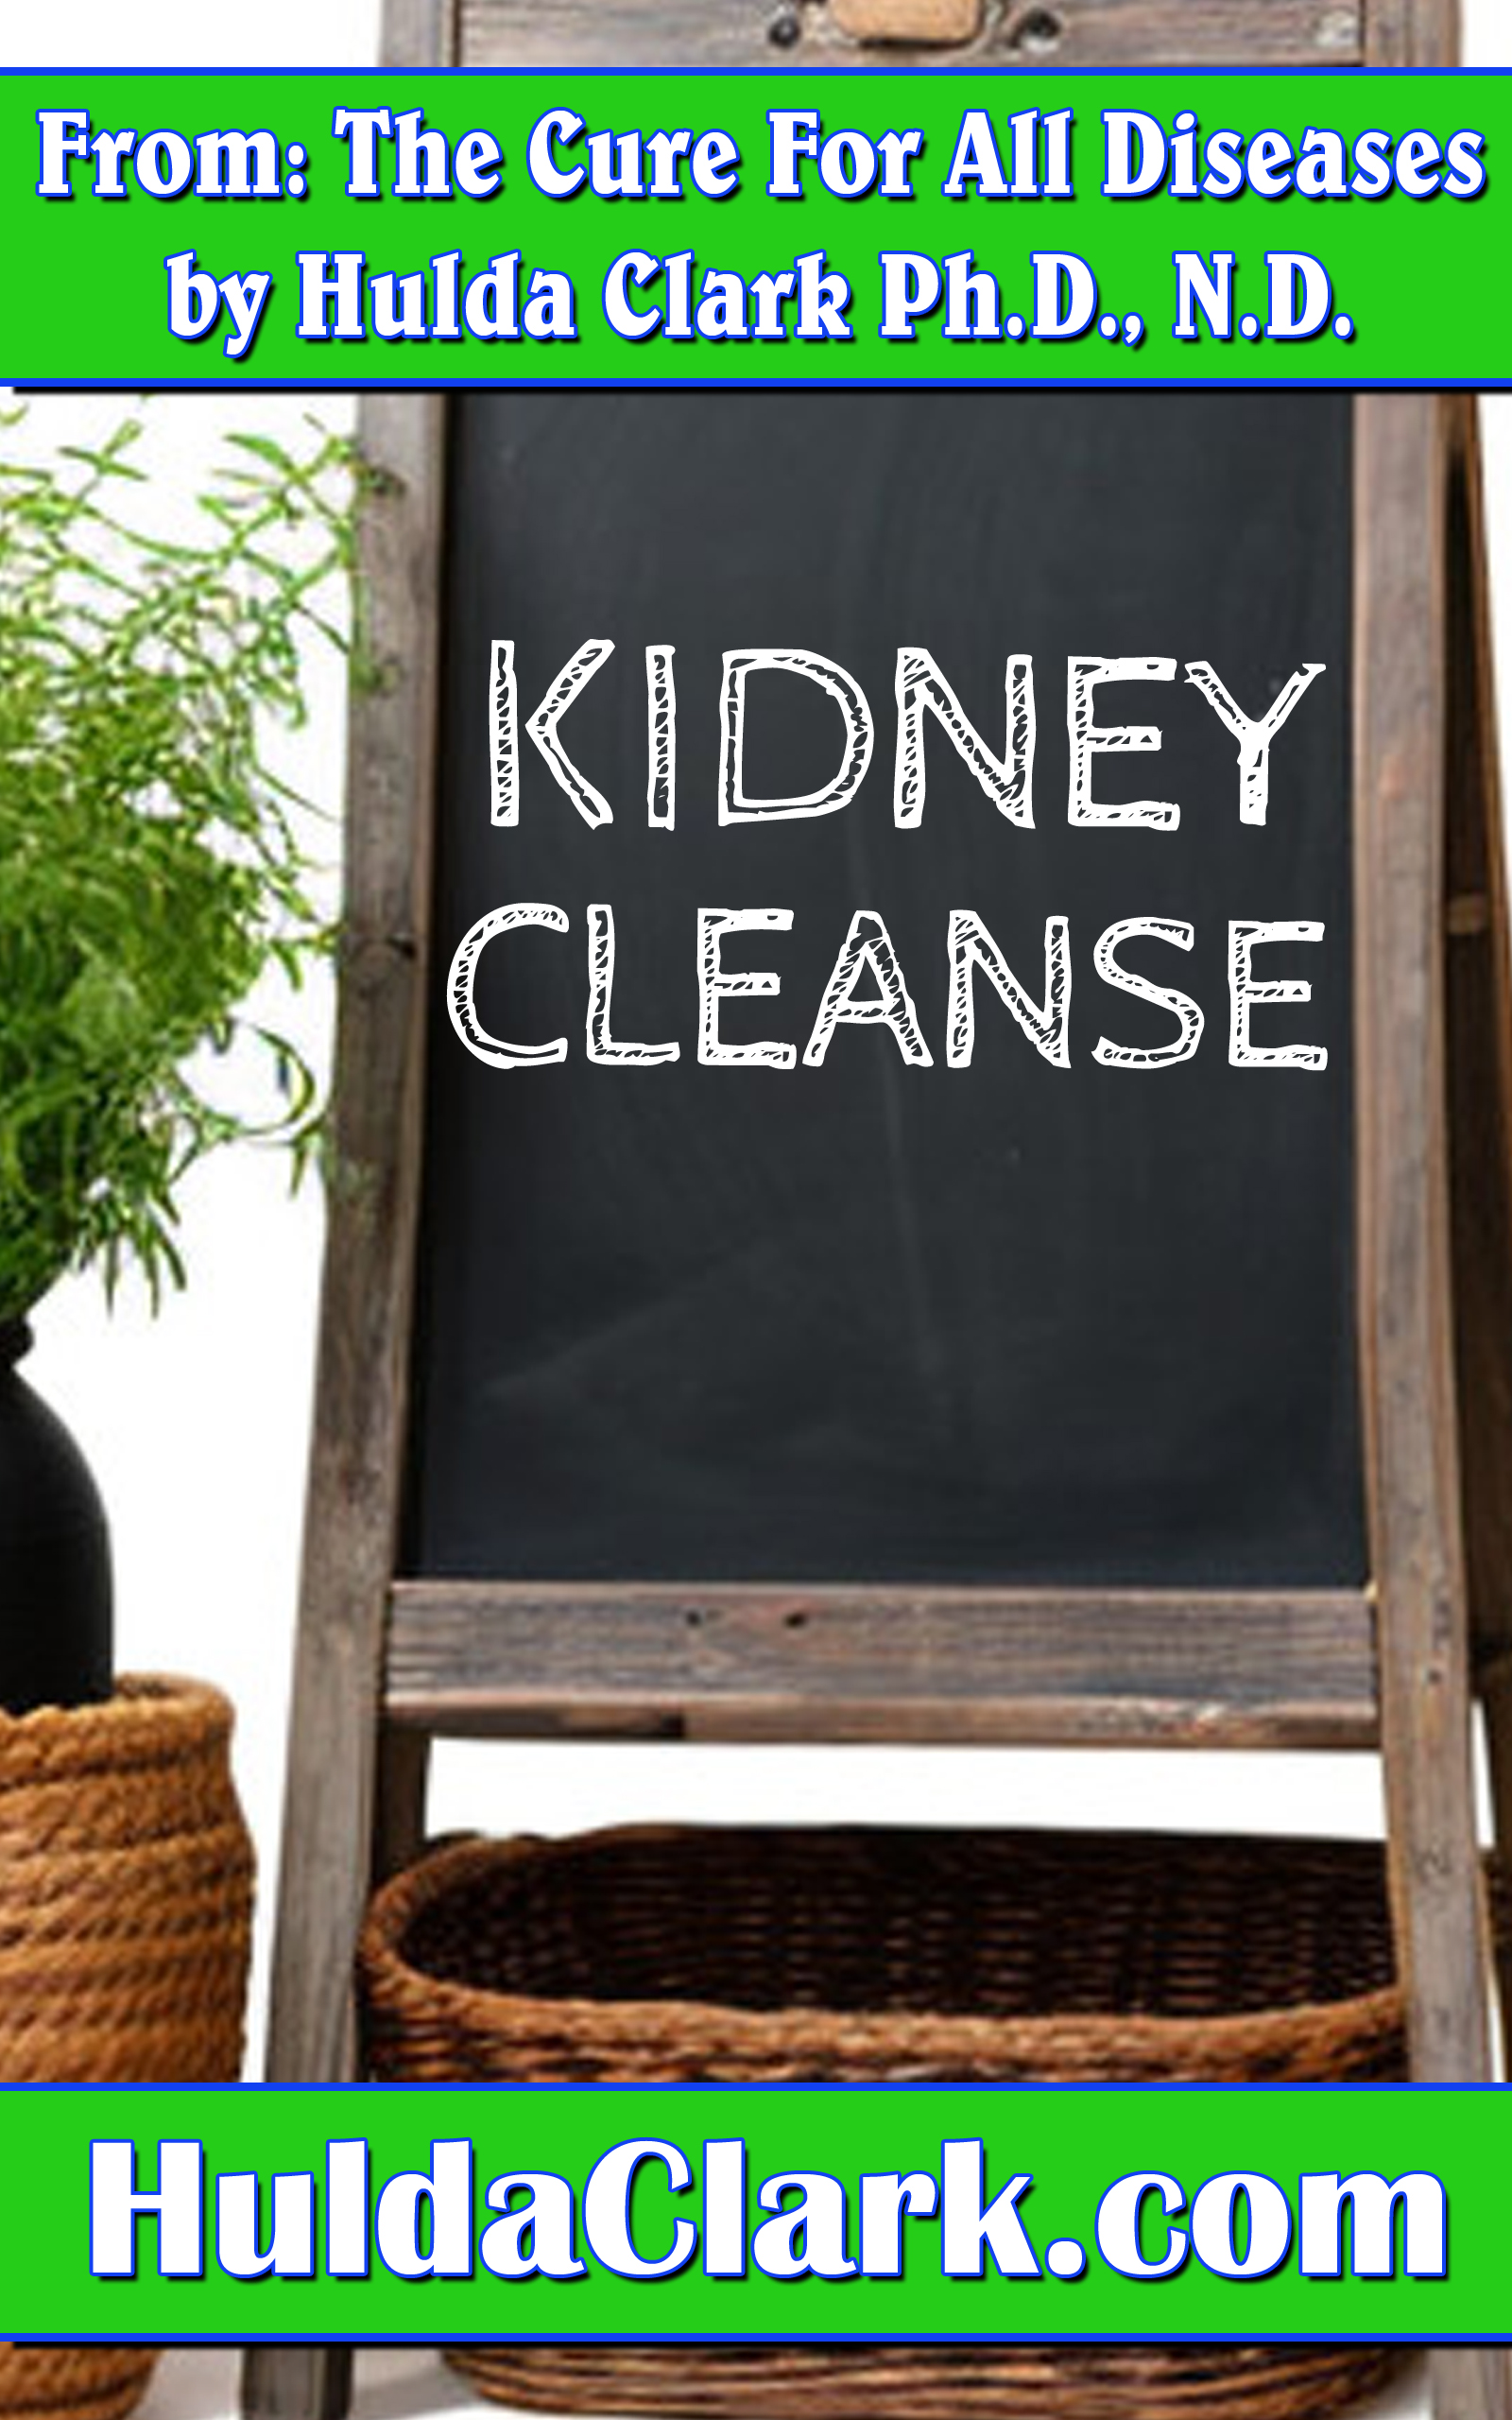 Kidney Cleanse Ebook excerpt from The Cure for All Diseases by Hulda Clark